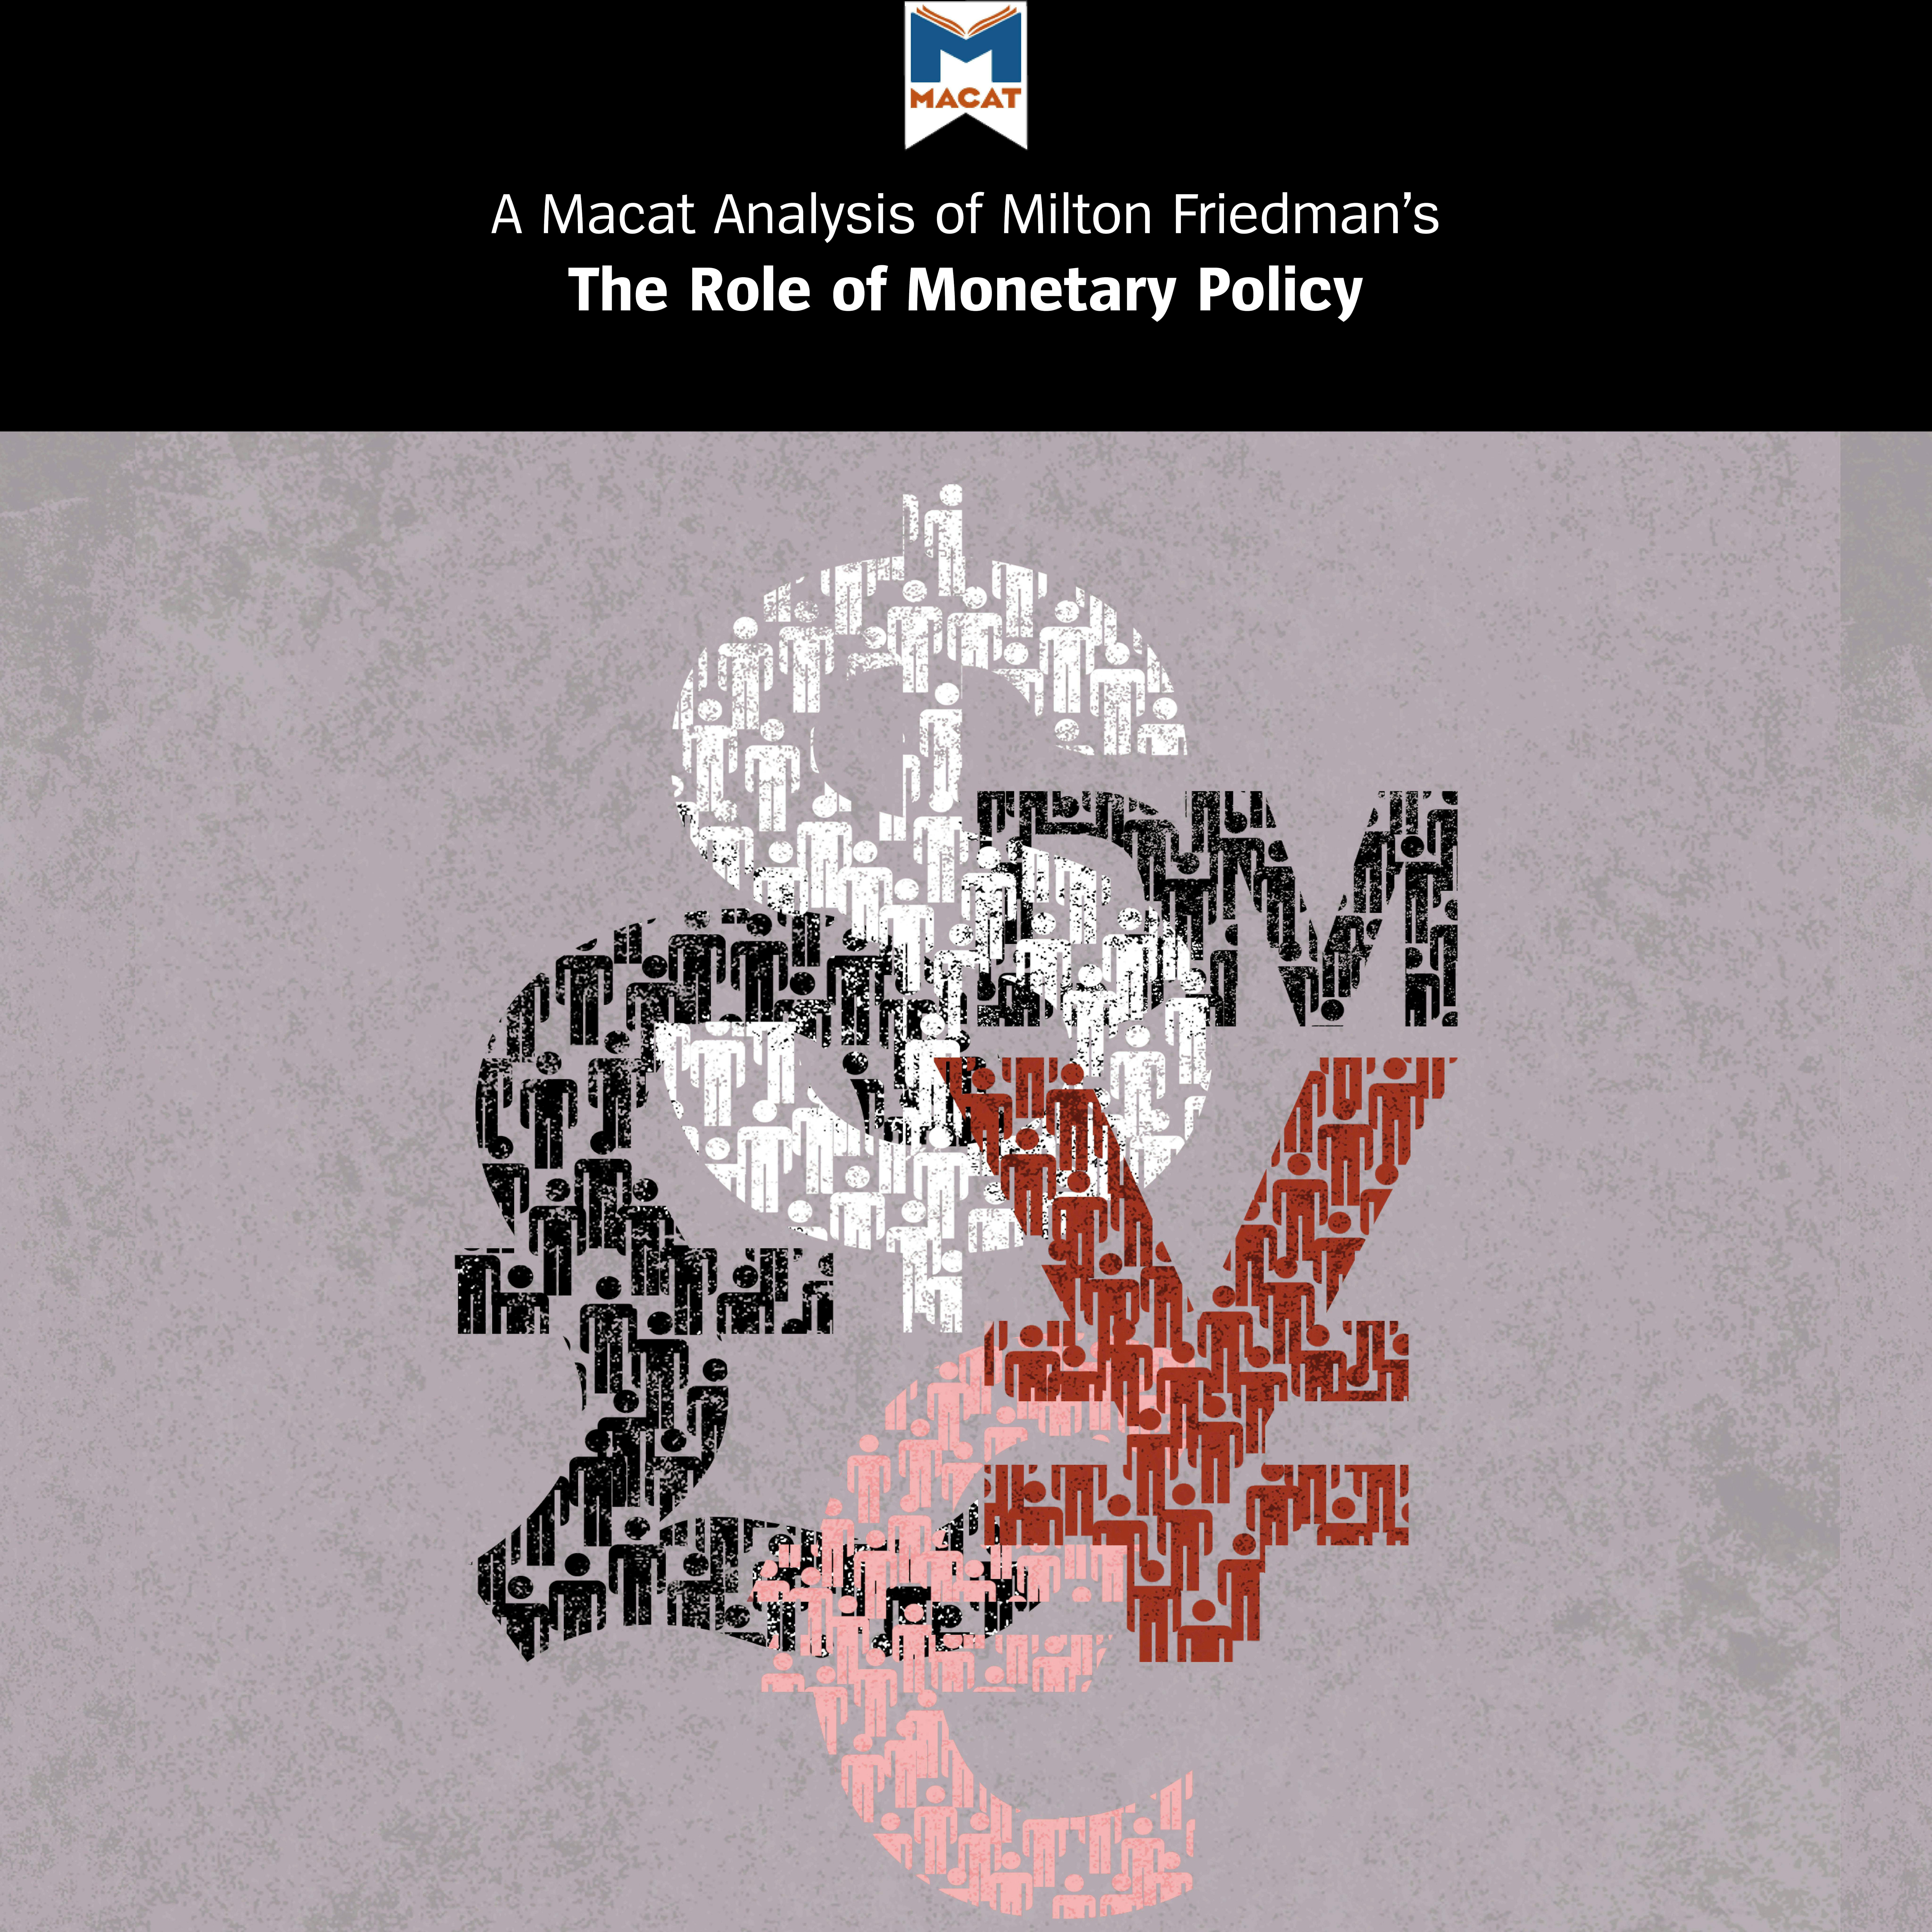 A Macat Analysis of Milton Friedman’s The Role of Monetary Policy - undefined